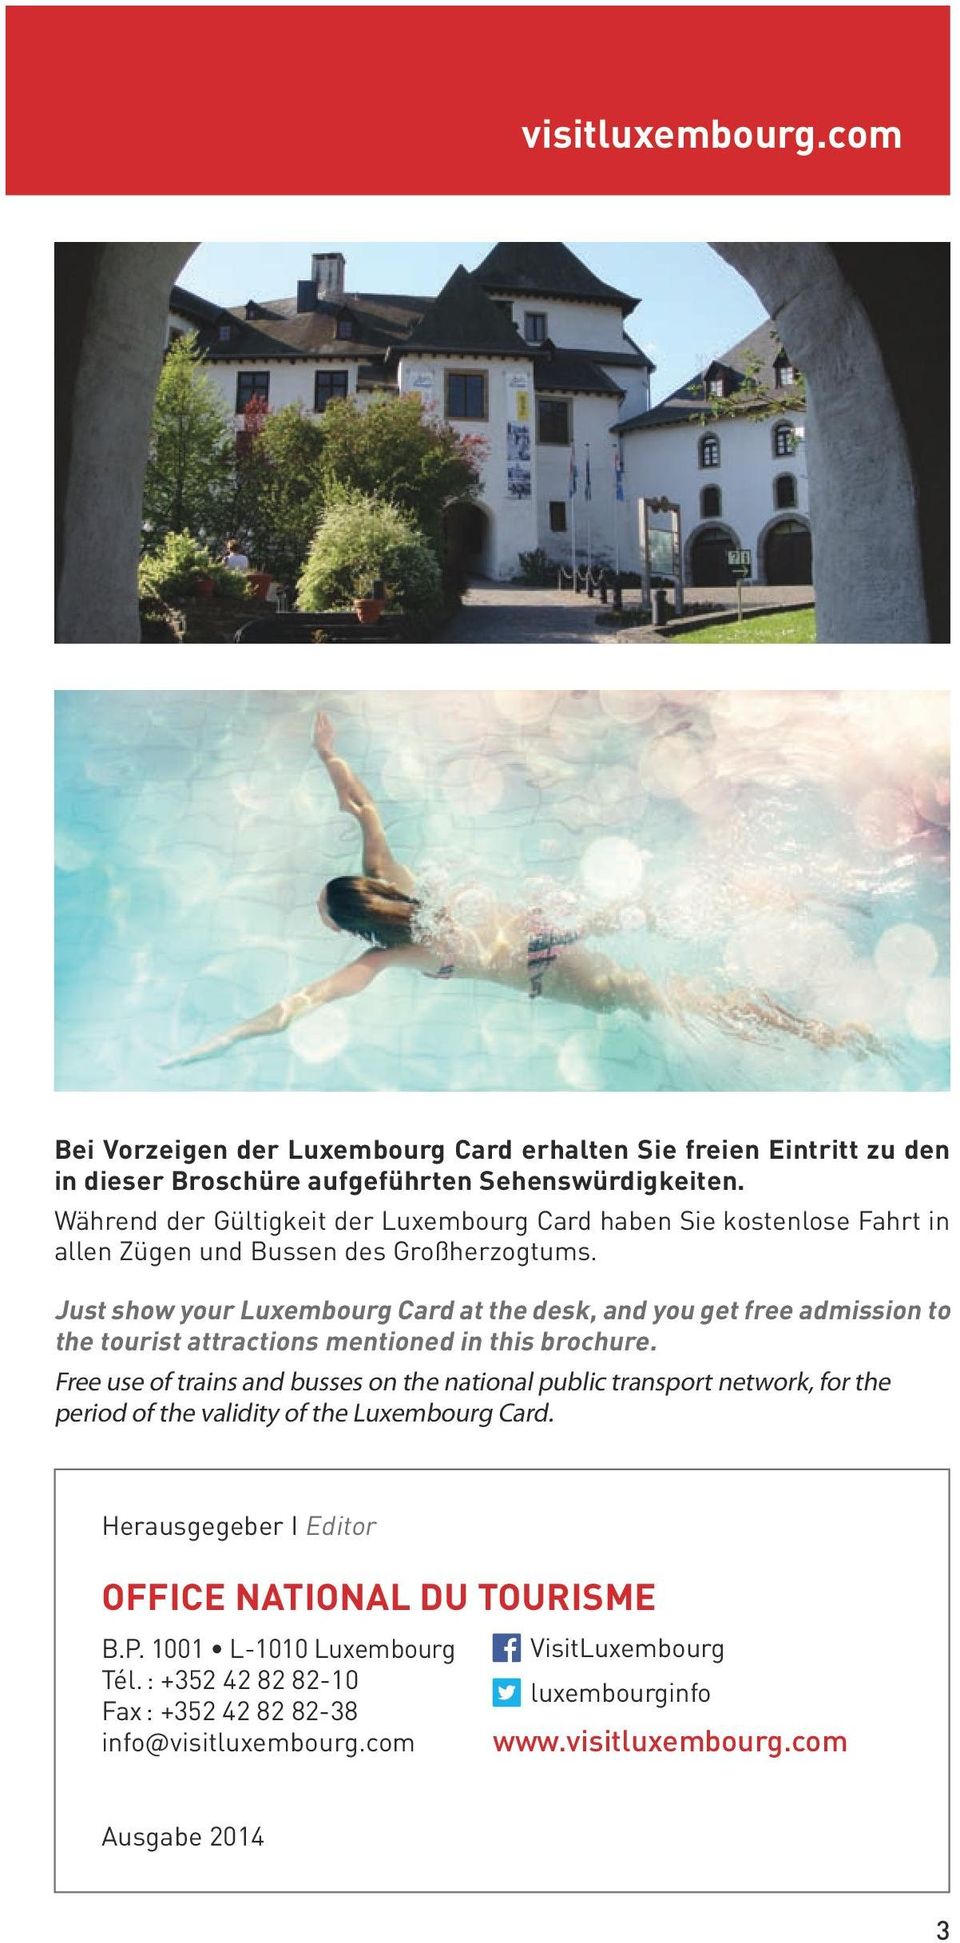 Just show your Luxembourg Card at the desk, and you get free admission to the tourist attractions mentioned in this brochure.